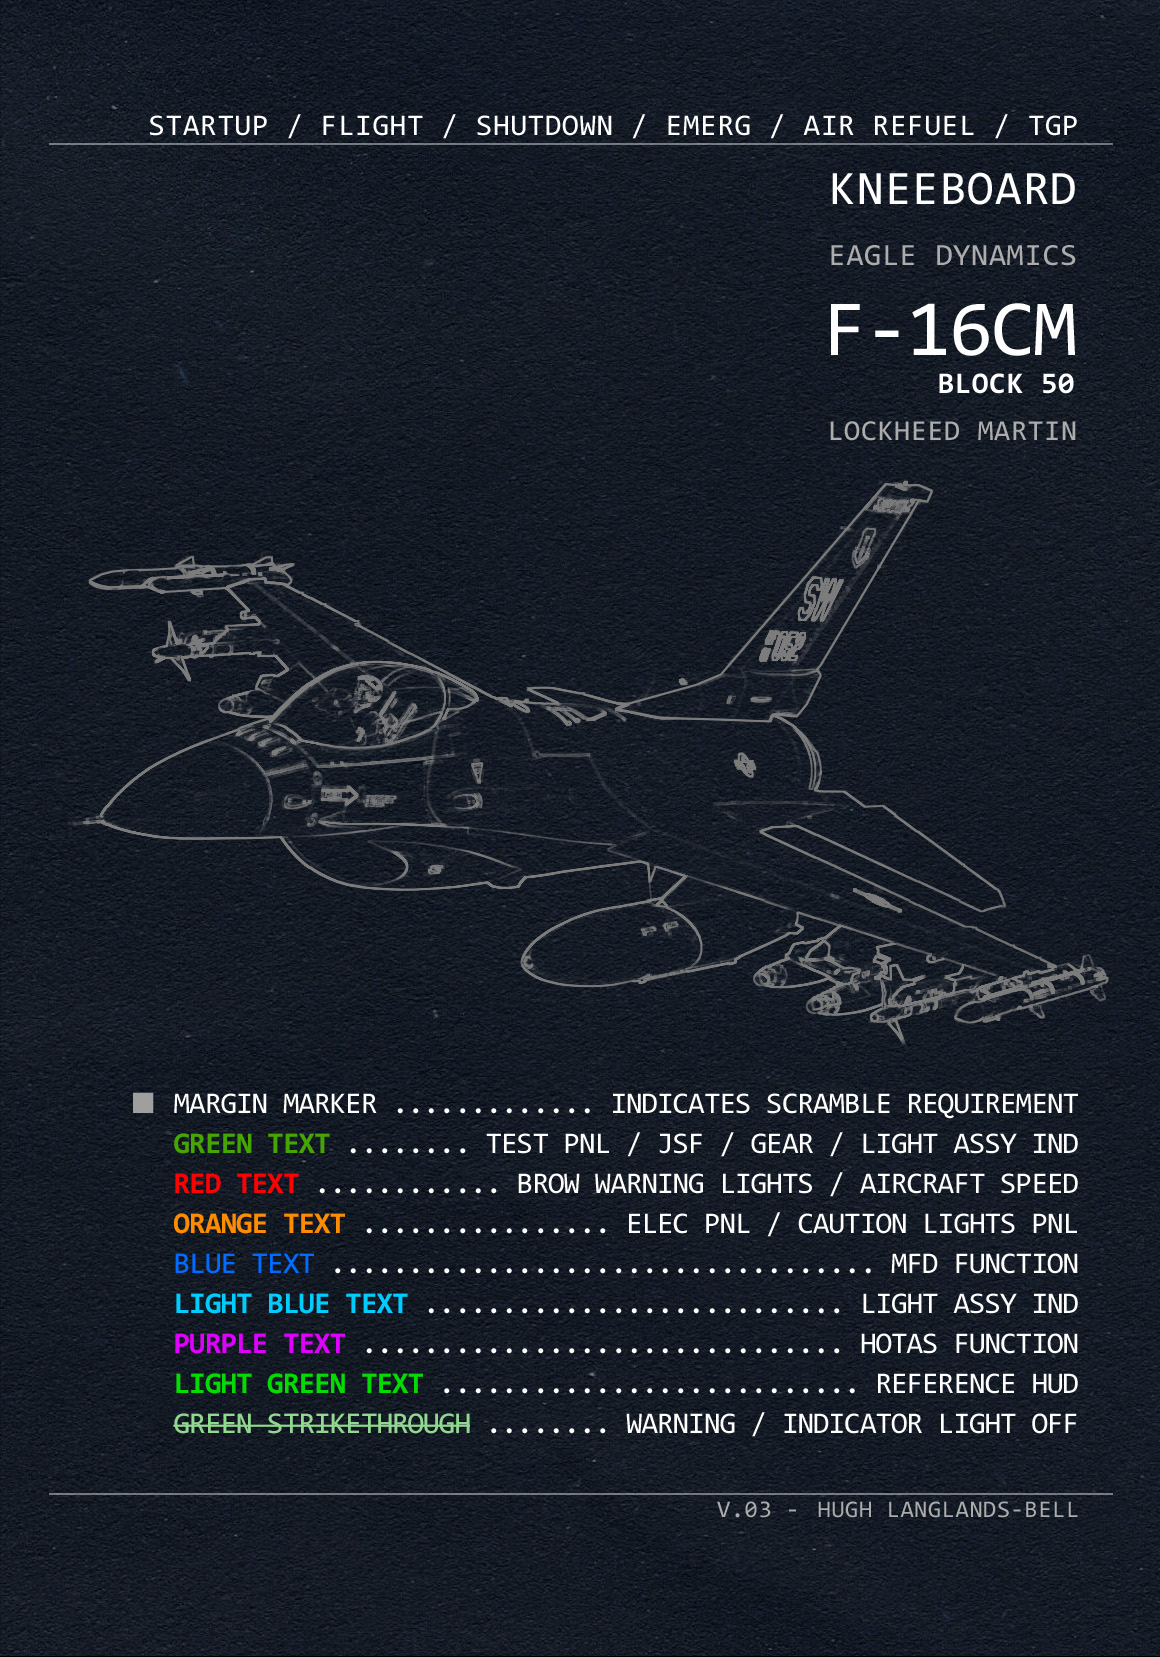 DCS F-16CM Viper Day/Night Kneeboard for Normal/Scramble Operations (V.03)